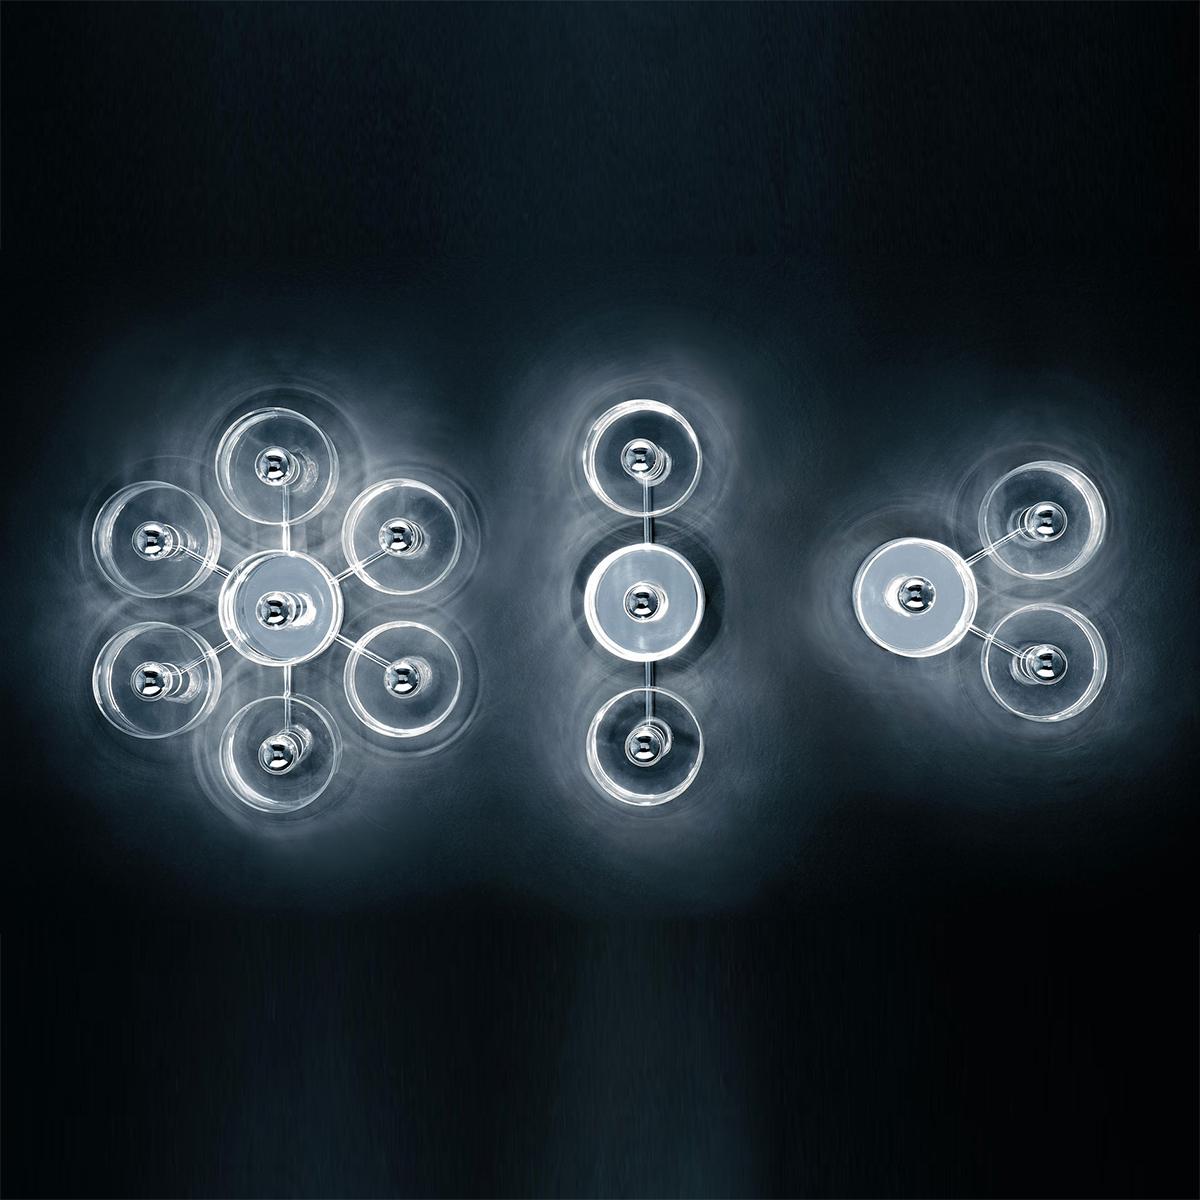 Wall lamp ''Fiore' designed by Marta Laudani & Marco Romanelli in 2007.
Wall and ceiling lamp in transparent blown glass giving direct and diffused light. Chromium-plated metal structure with 7-light on a flower disposition. Manufactured by Oluce,